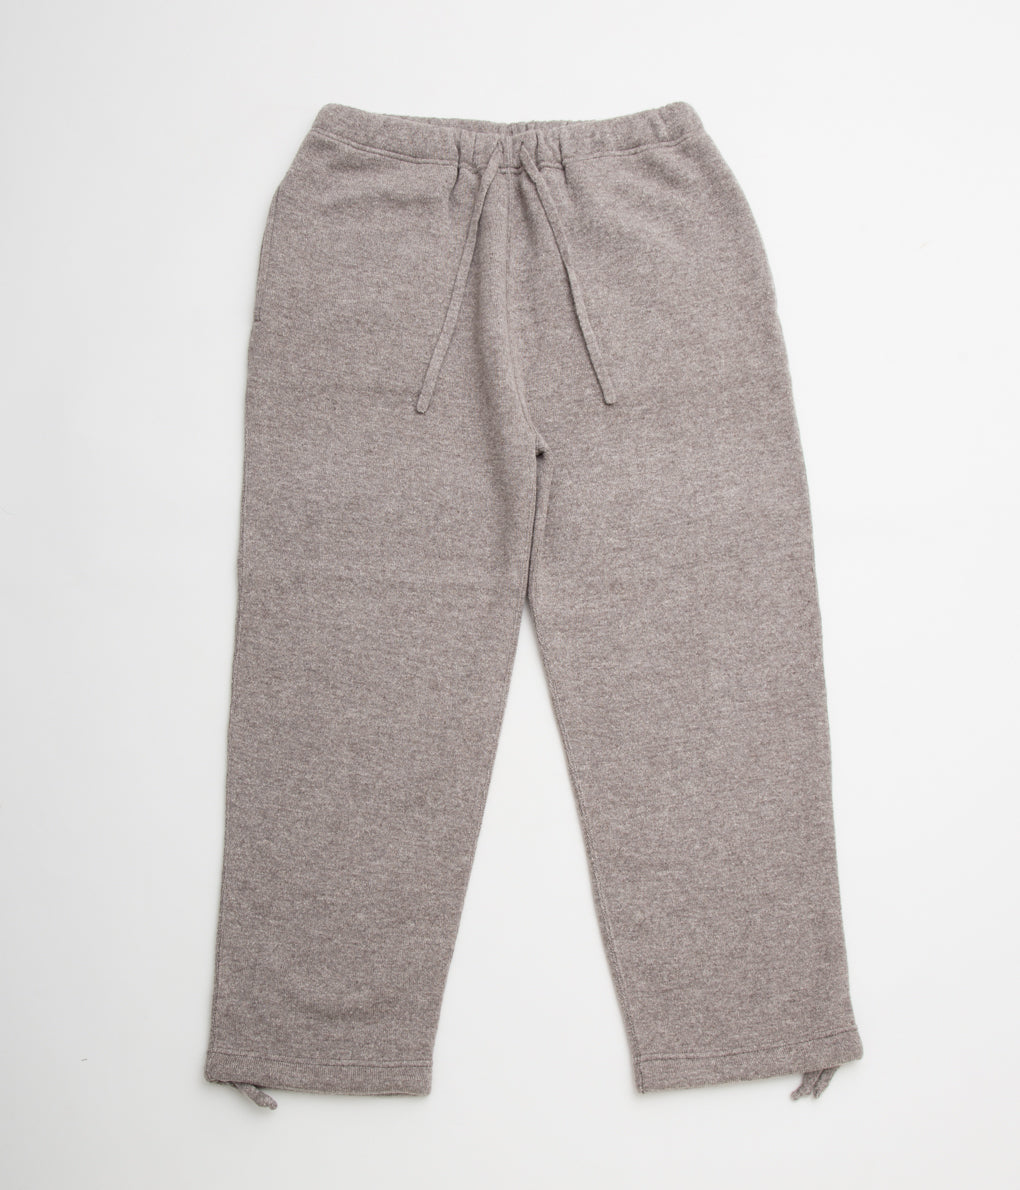 HERILL Duofold Double Layer Sweatpants 2-